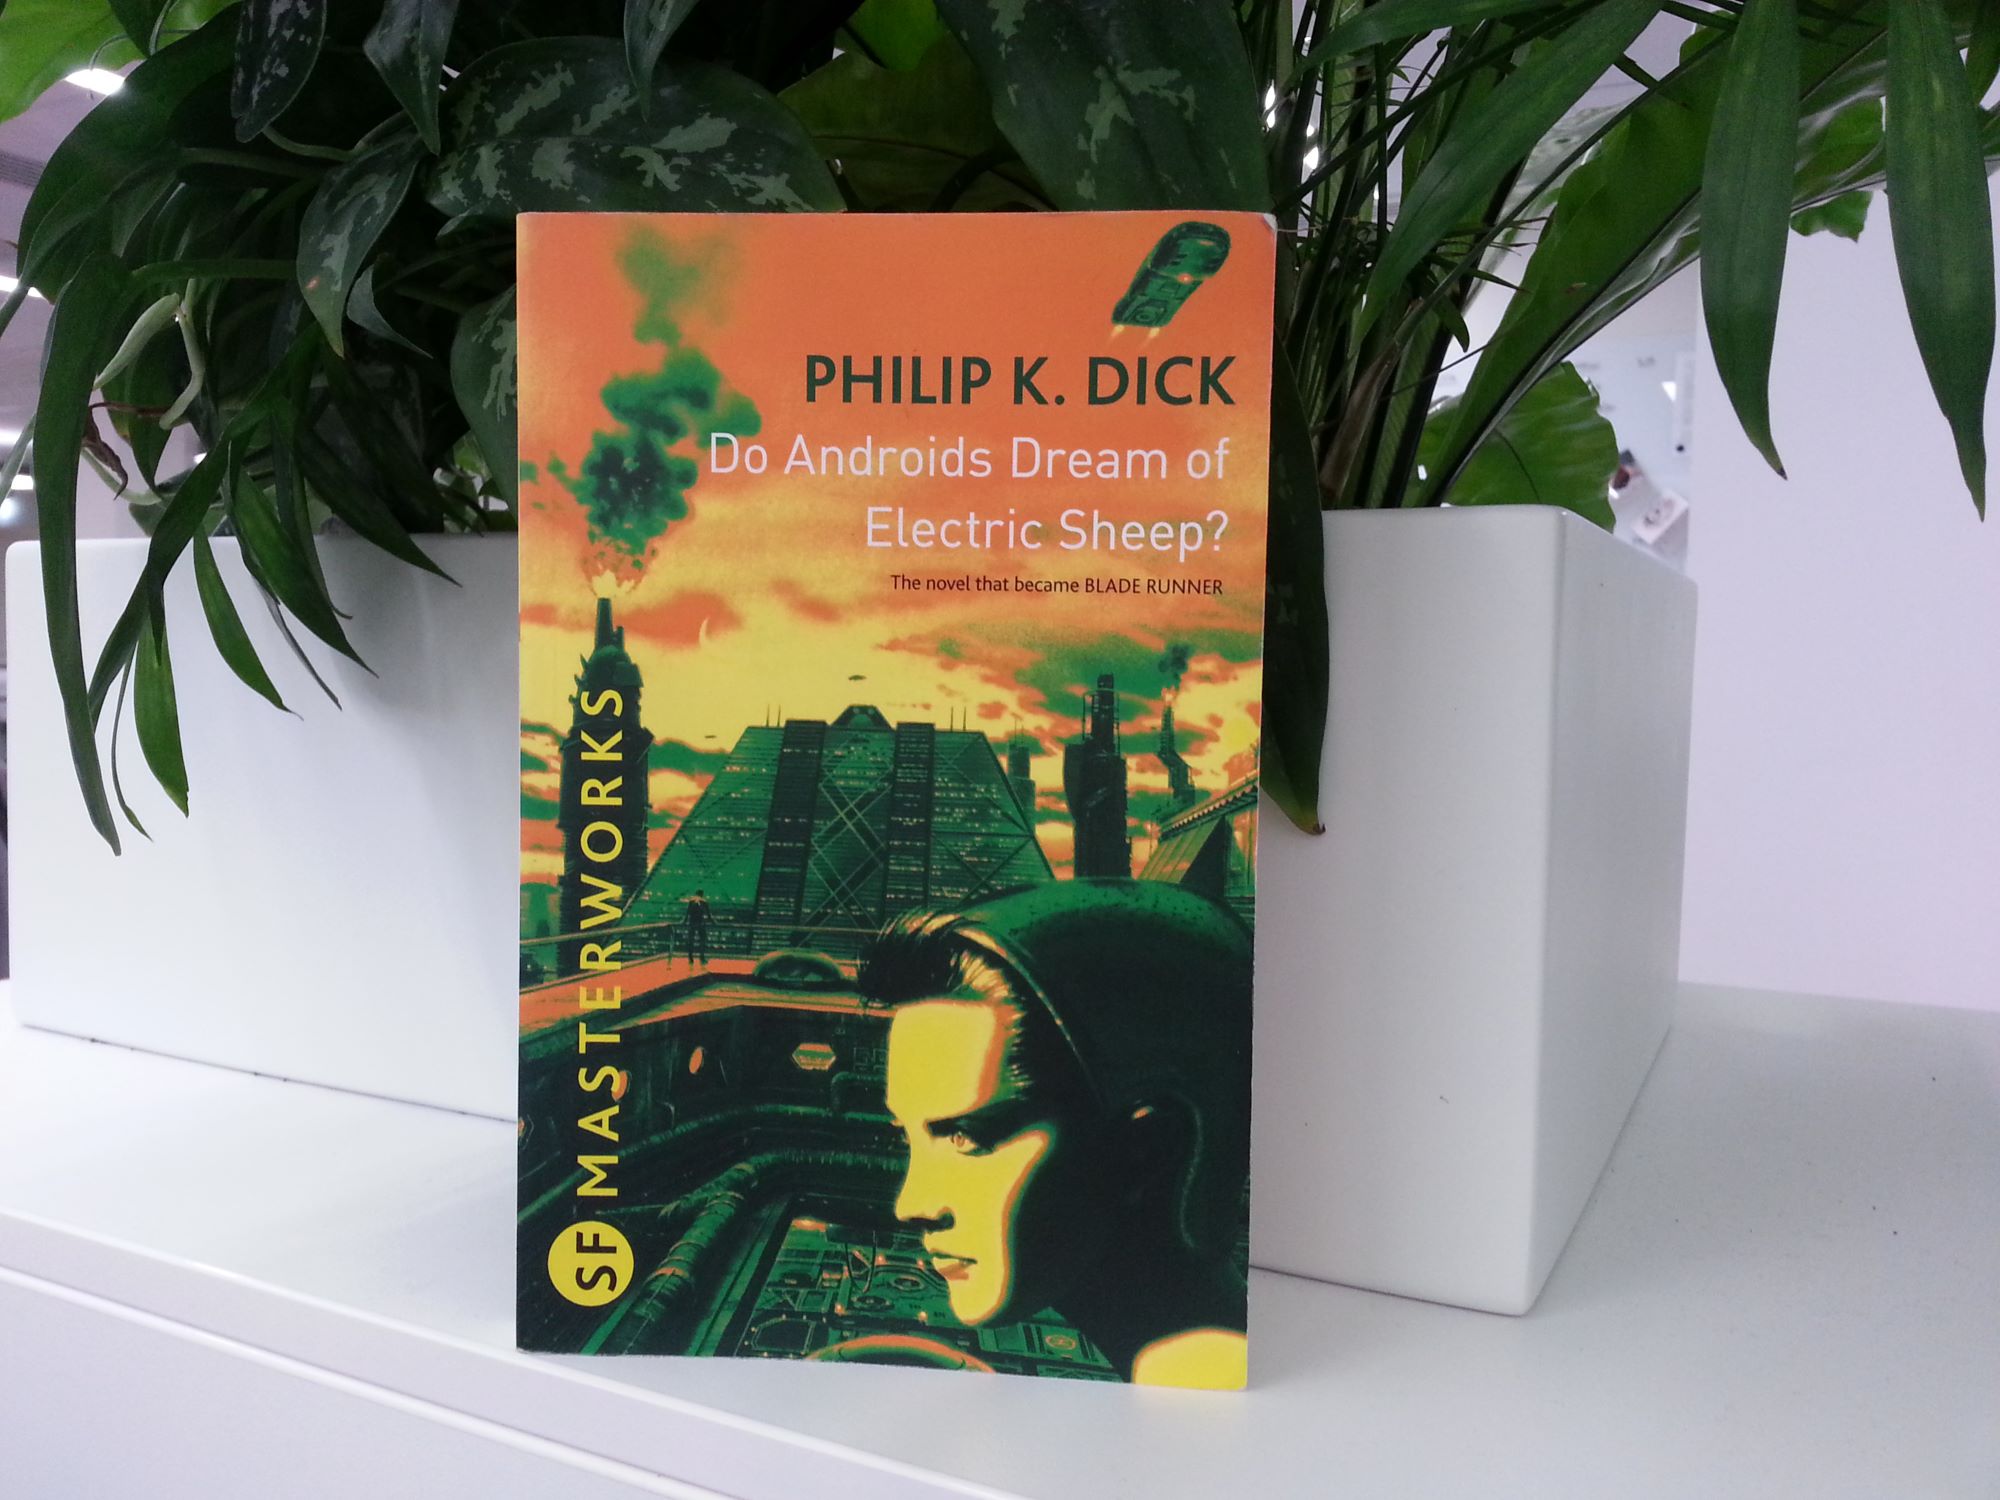 11-captivating-facts-about-do-androids-dream-of-electric-sheep-philip-k-dick